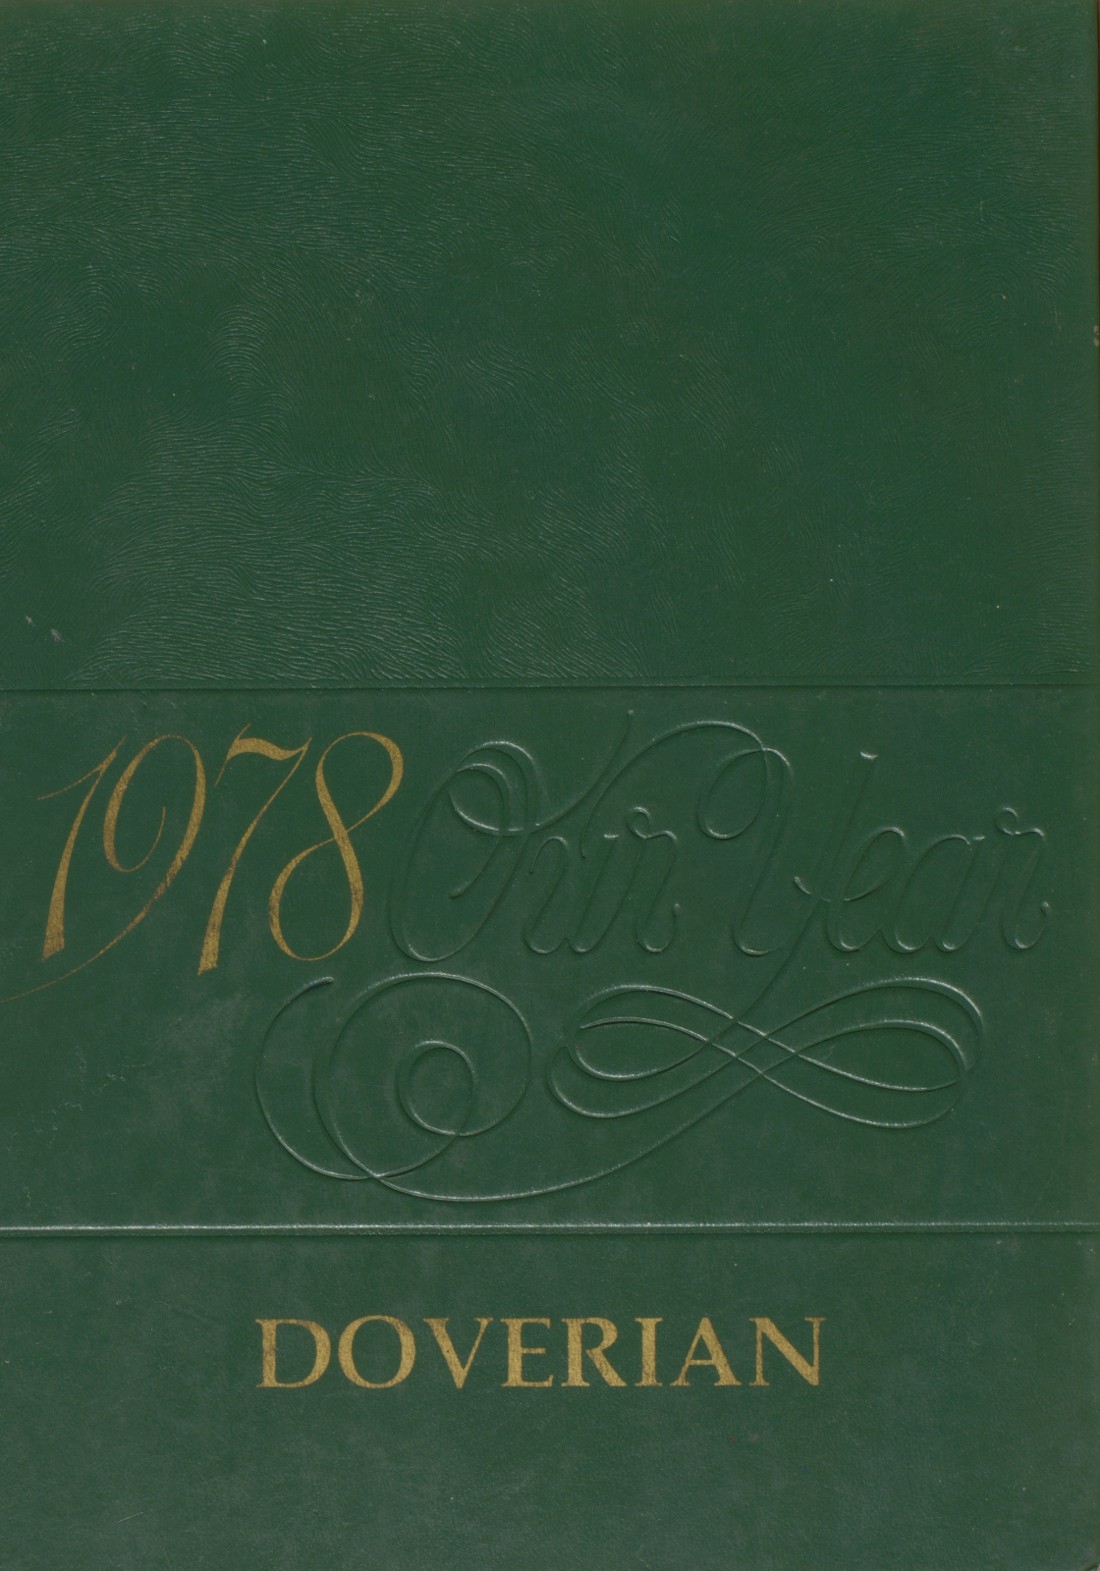 1978 yearbook from Dover High School from Dover plains, New York